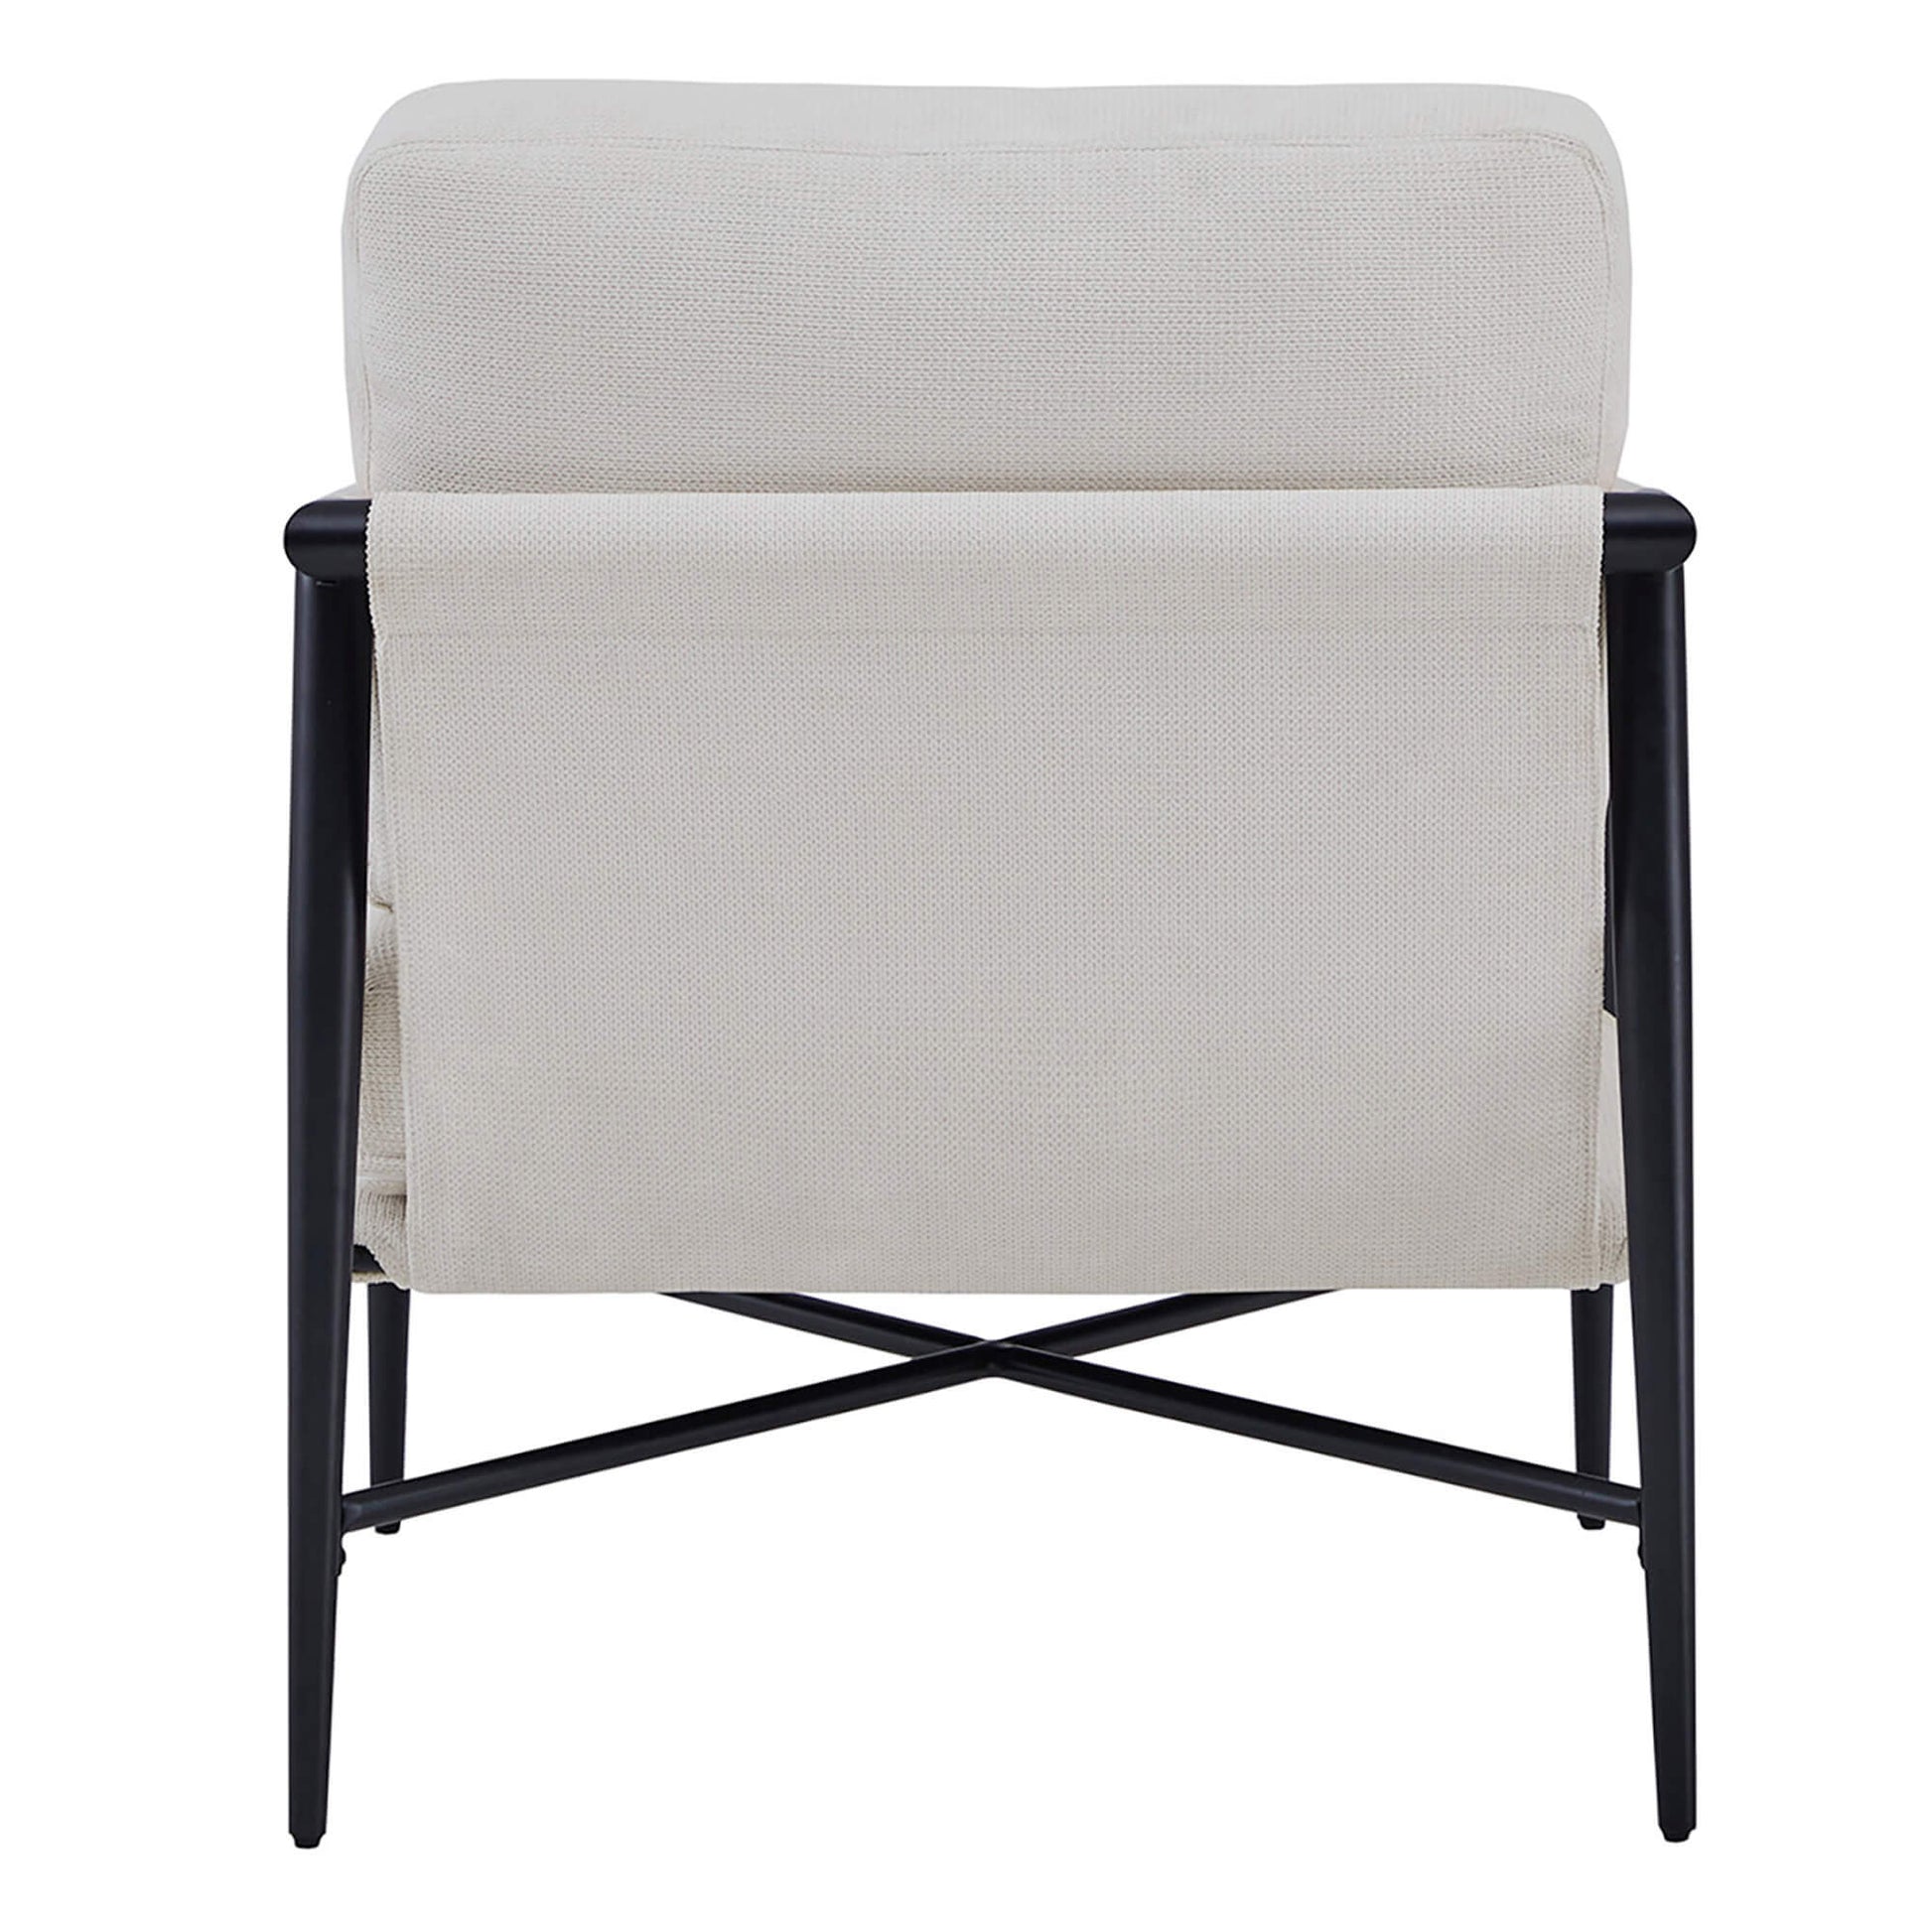 CHITA LIVING-Charlotte Modern Accent Chair-Accent Chair-Fabric-Beige-